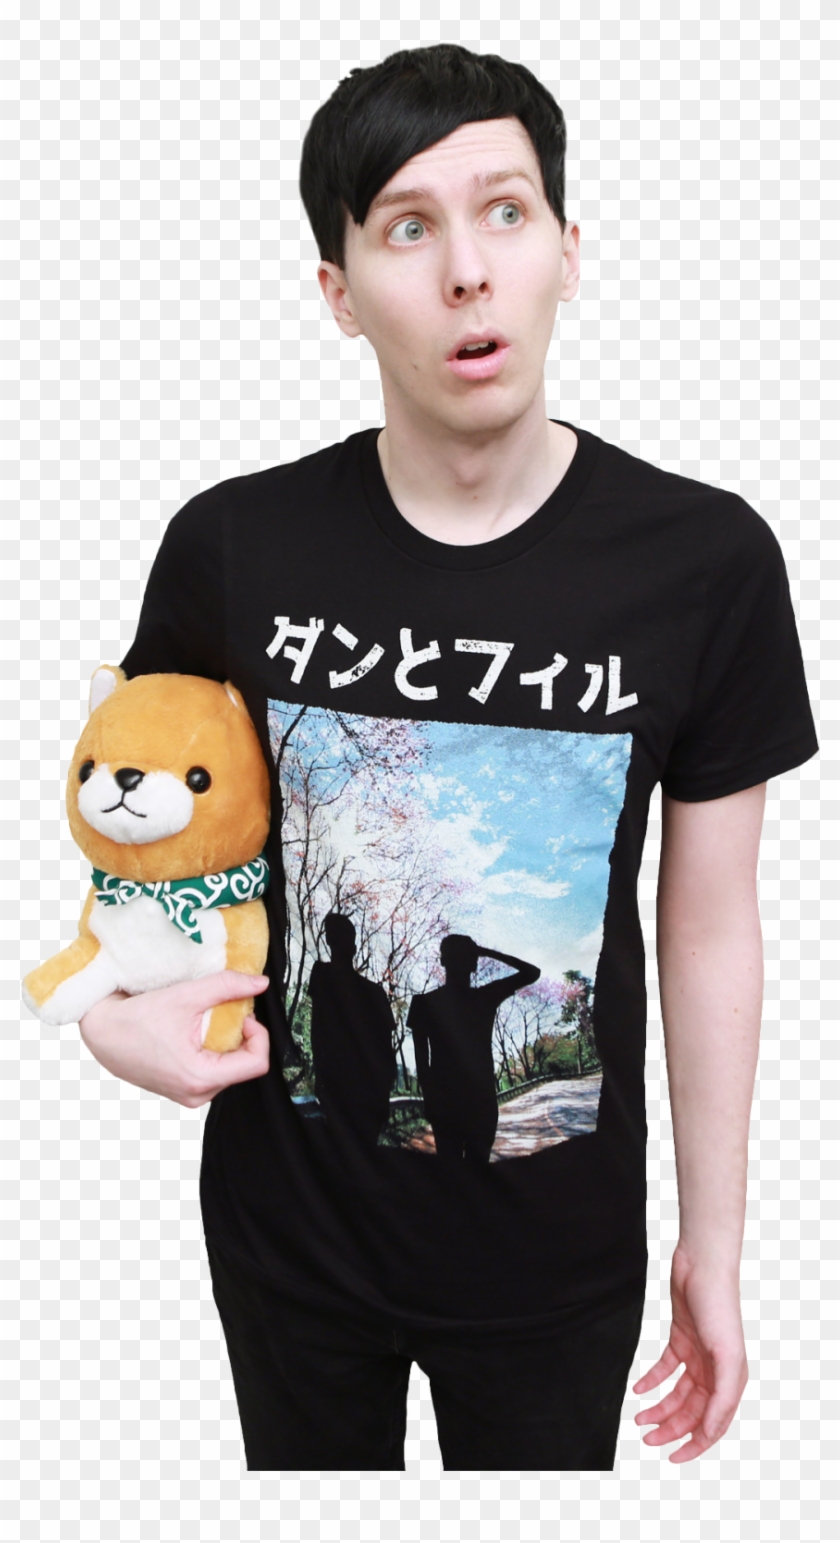 Transparent Dan And Phil Pngs Some Transparents Of - Dan And Phil Japan Sweater Clipart